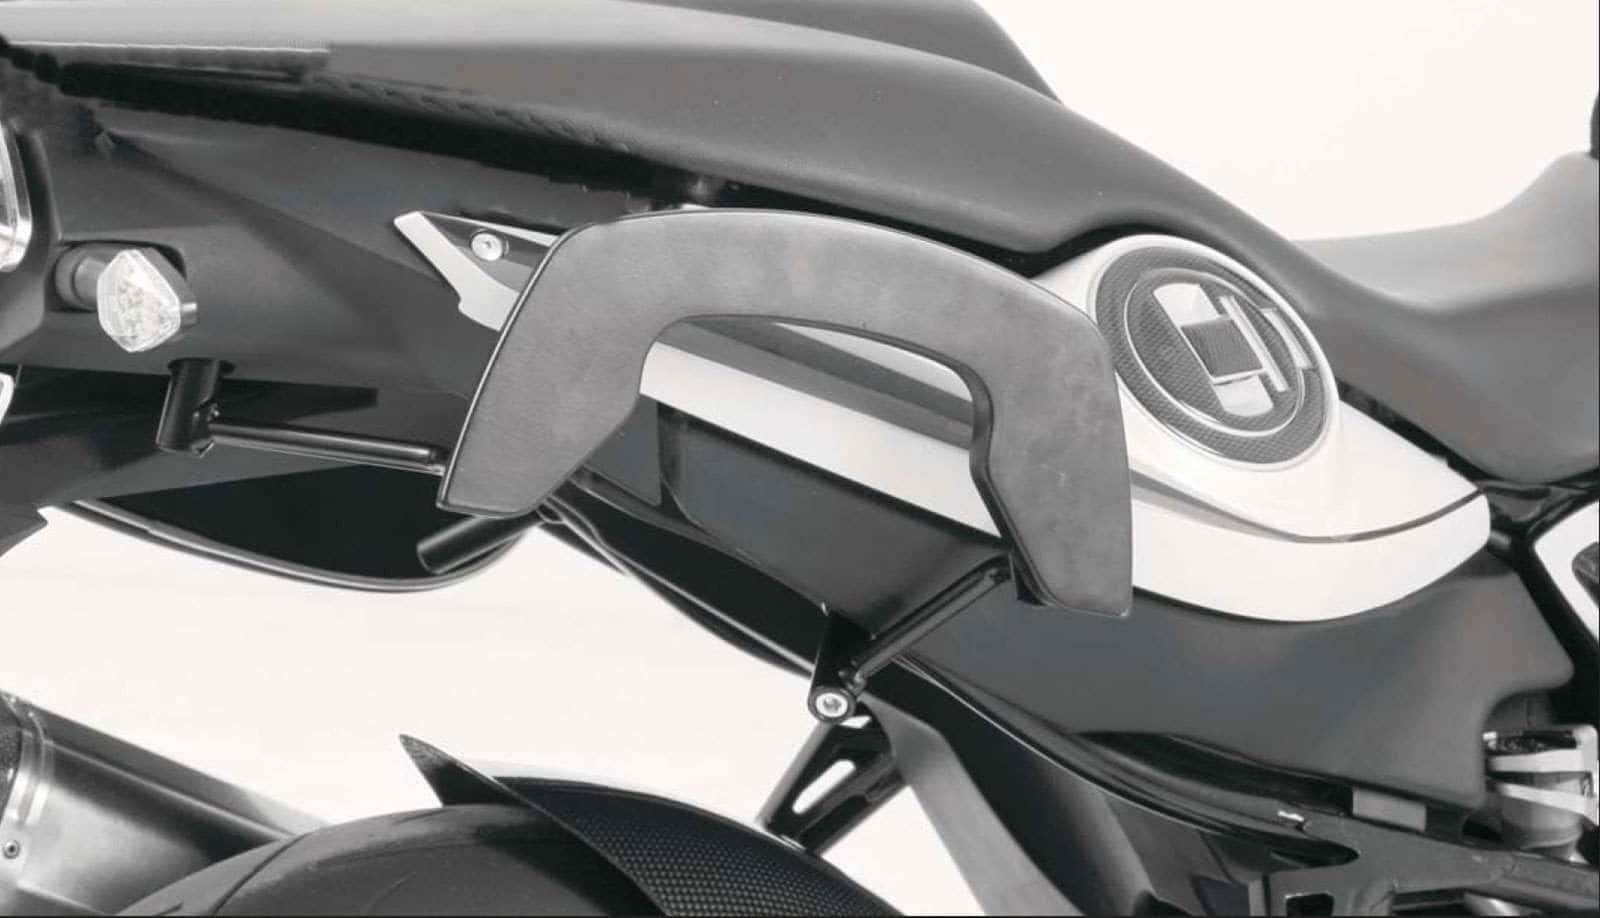 C-Bow sidecarrier for BMW F 800 S (2006-2011)/F 800 ST (2006-2012)